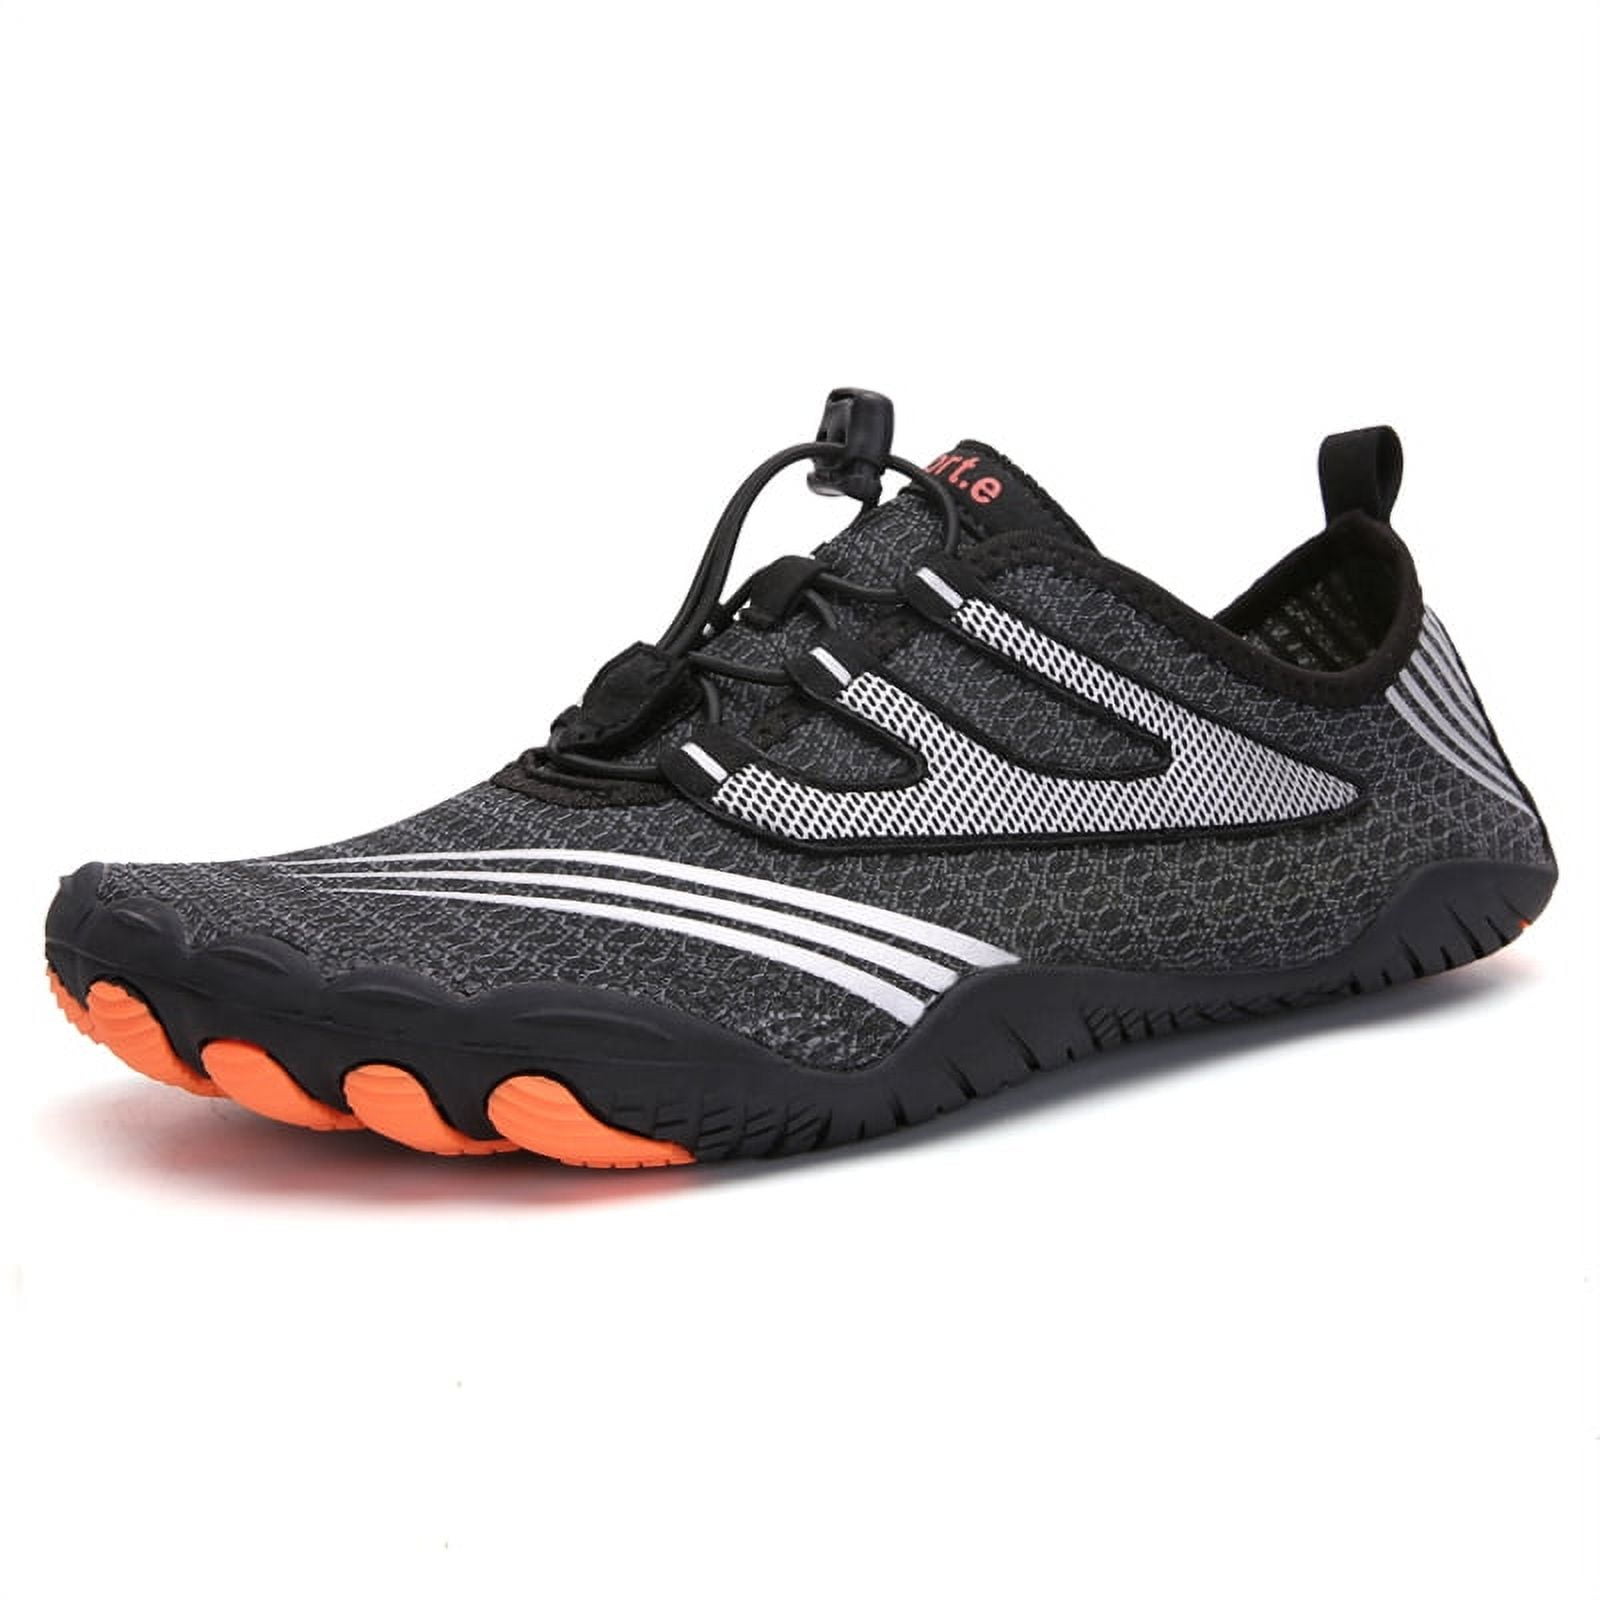 Aqua Sock Barefoot Outdoor Athletic Sport Walking Shoes Quick Drying ...